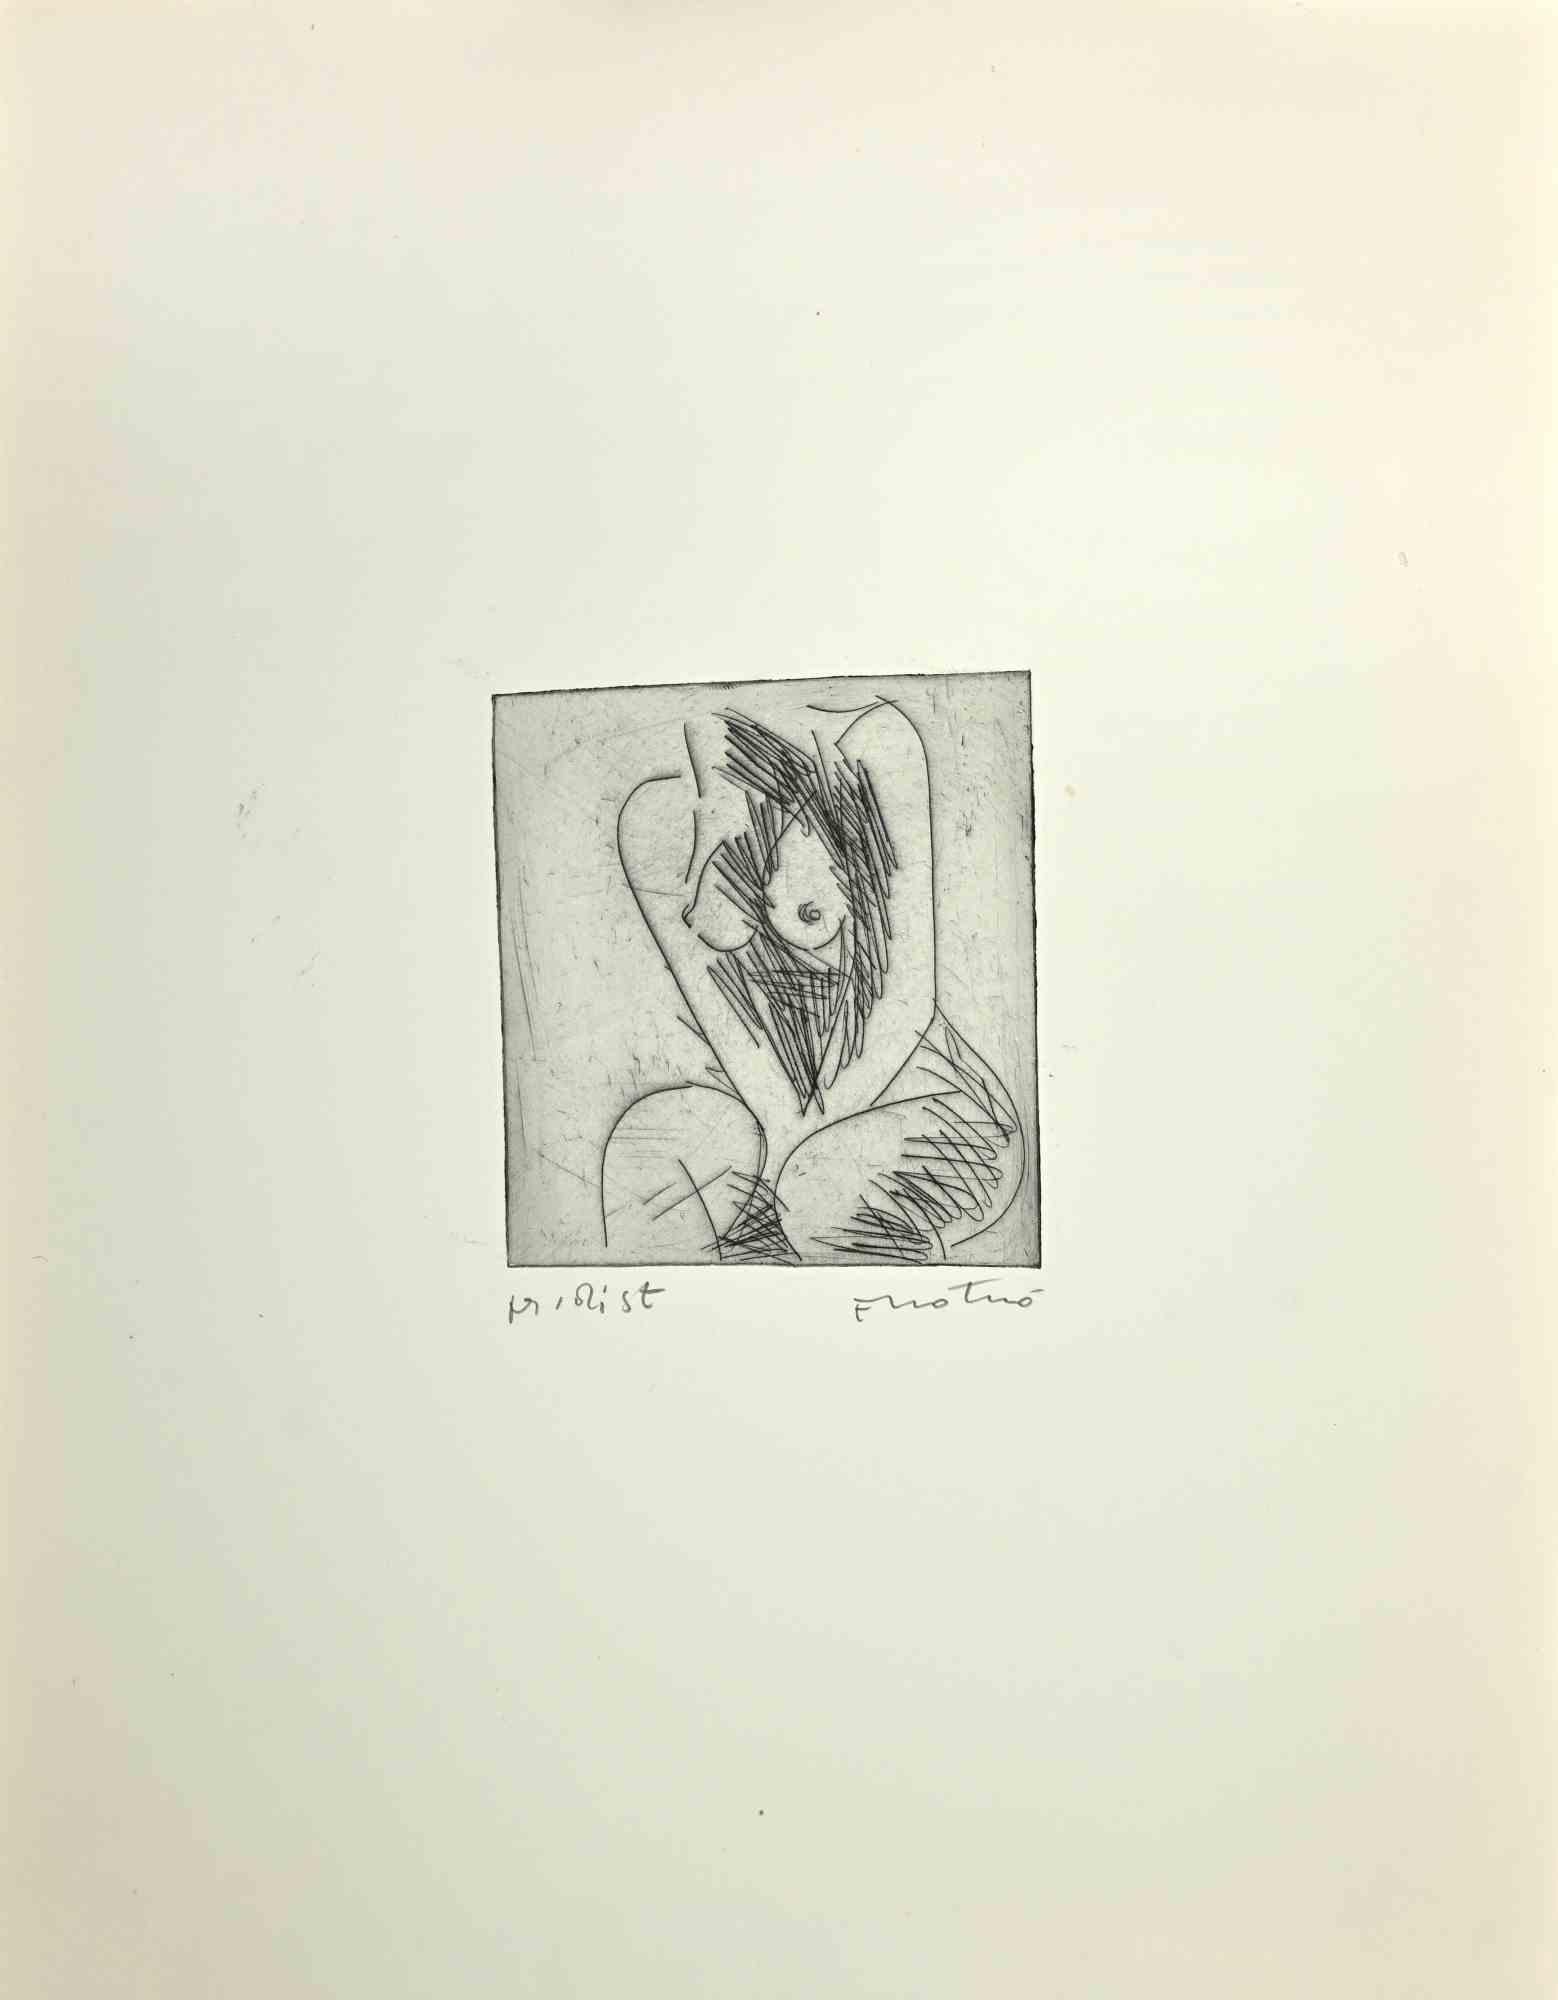 Nude is an Etching and Aquatint realized by Enotrio Pugliese in 1970s.

Artist's proof.

signed by the artist.

Good conditions.

Enotrio Pugliese (May 11, 1920 - August 1989) was an Italian painter. Born in Buenos Aires to a Calabrian family who